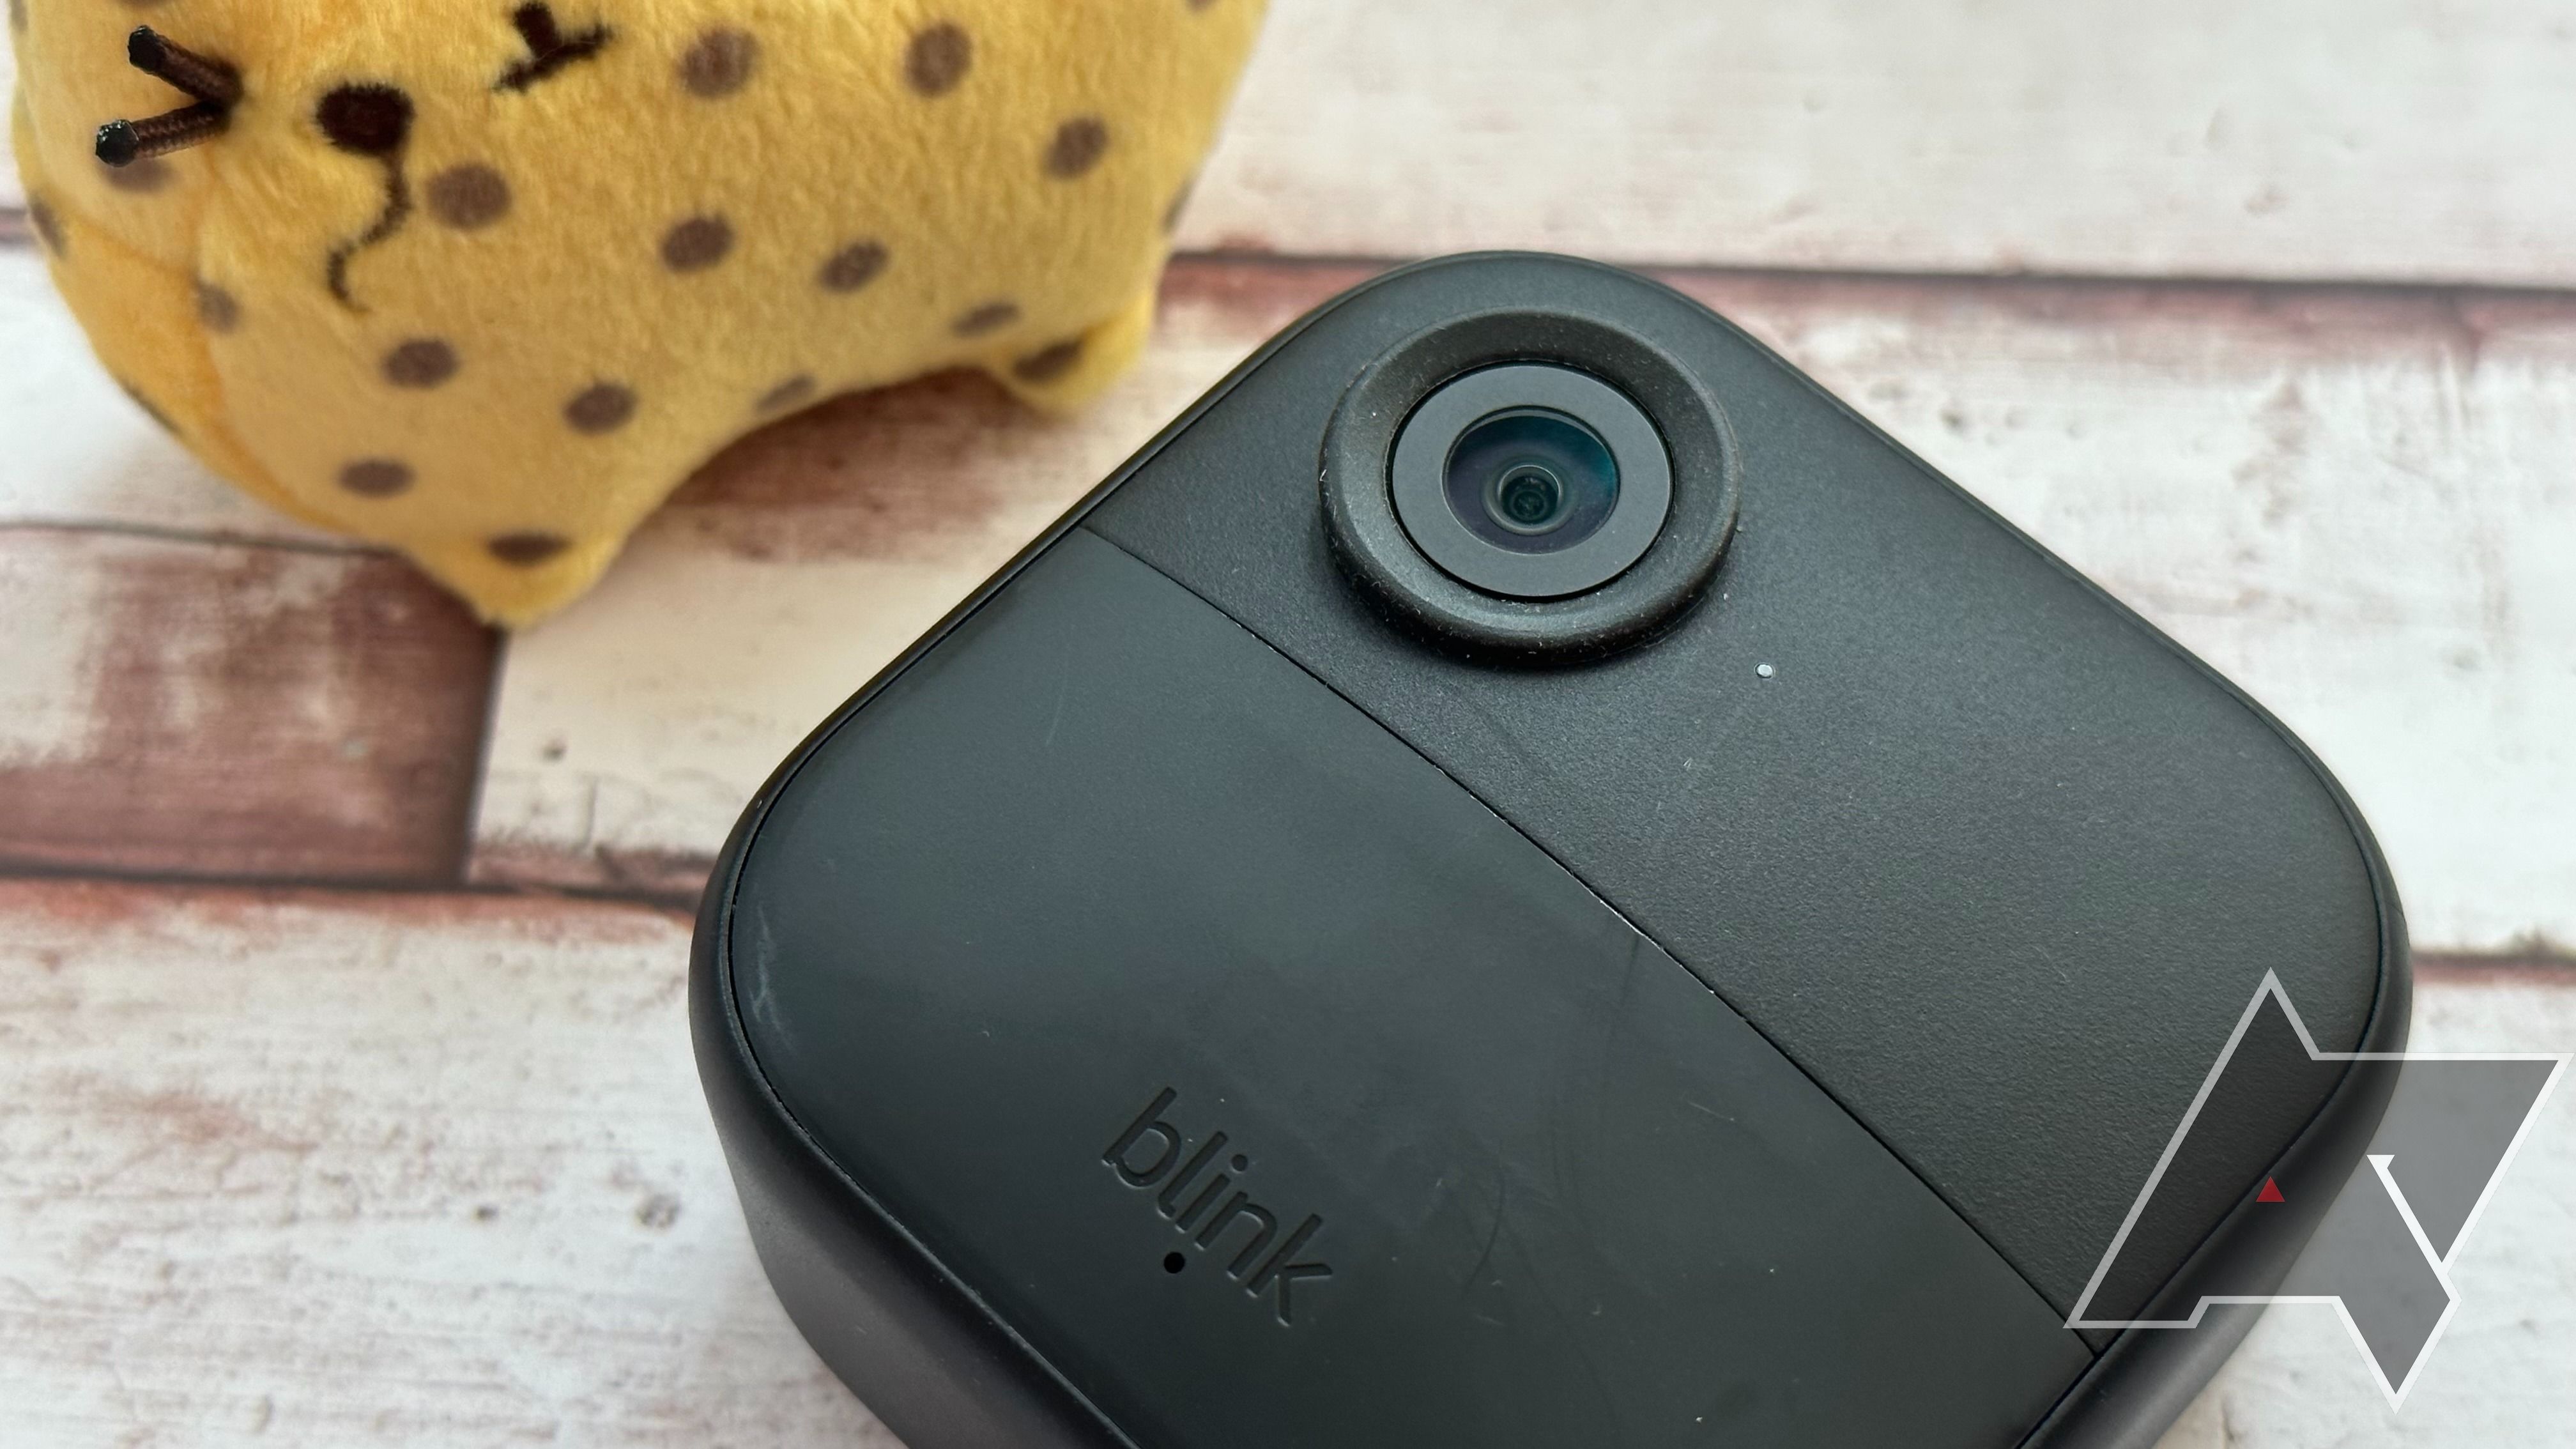 Blink Outdoor 4 review: Set it and forget it